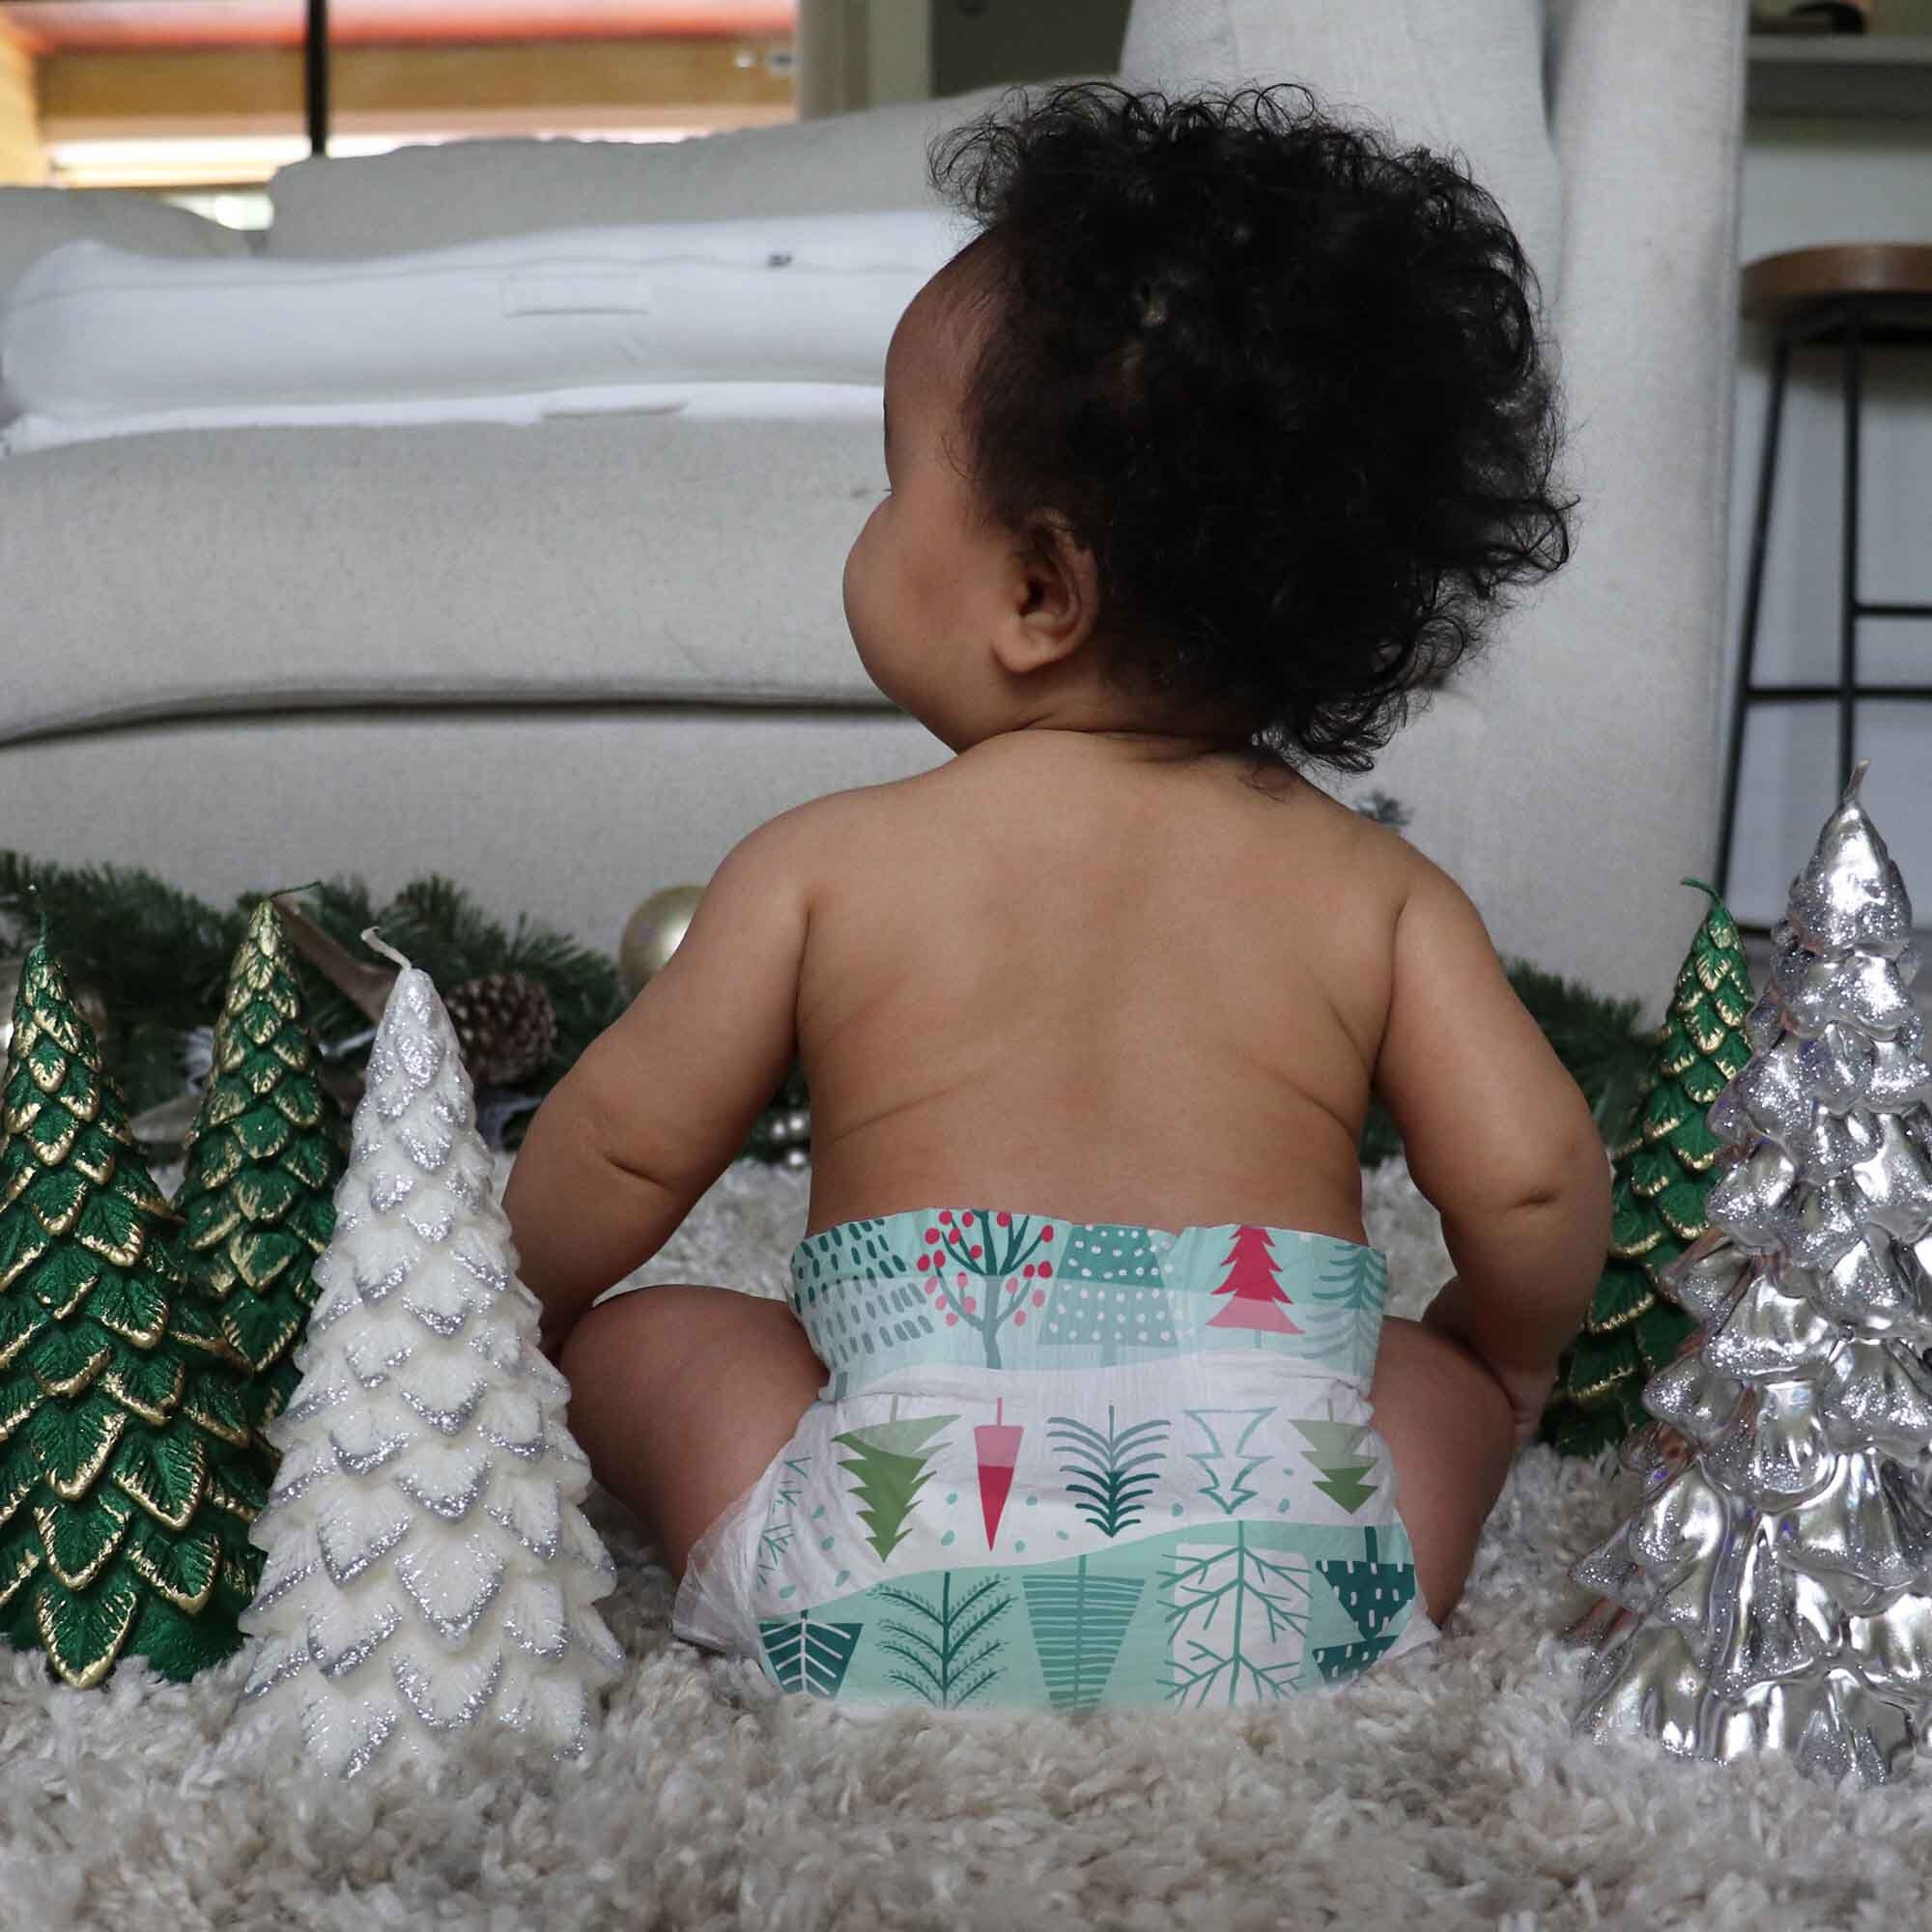 Baby wearing diaper with Christmas tree print on it